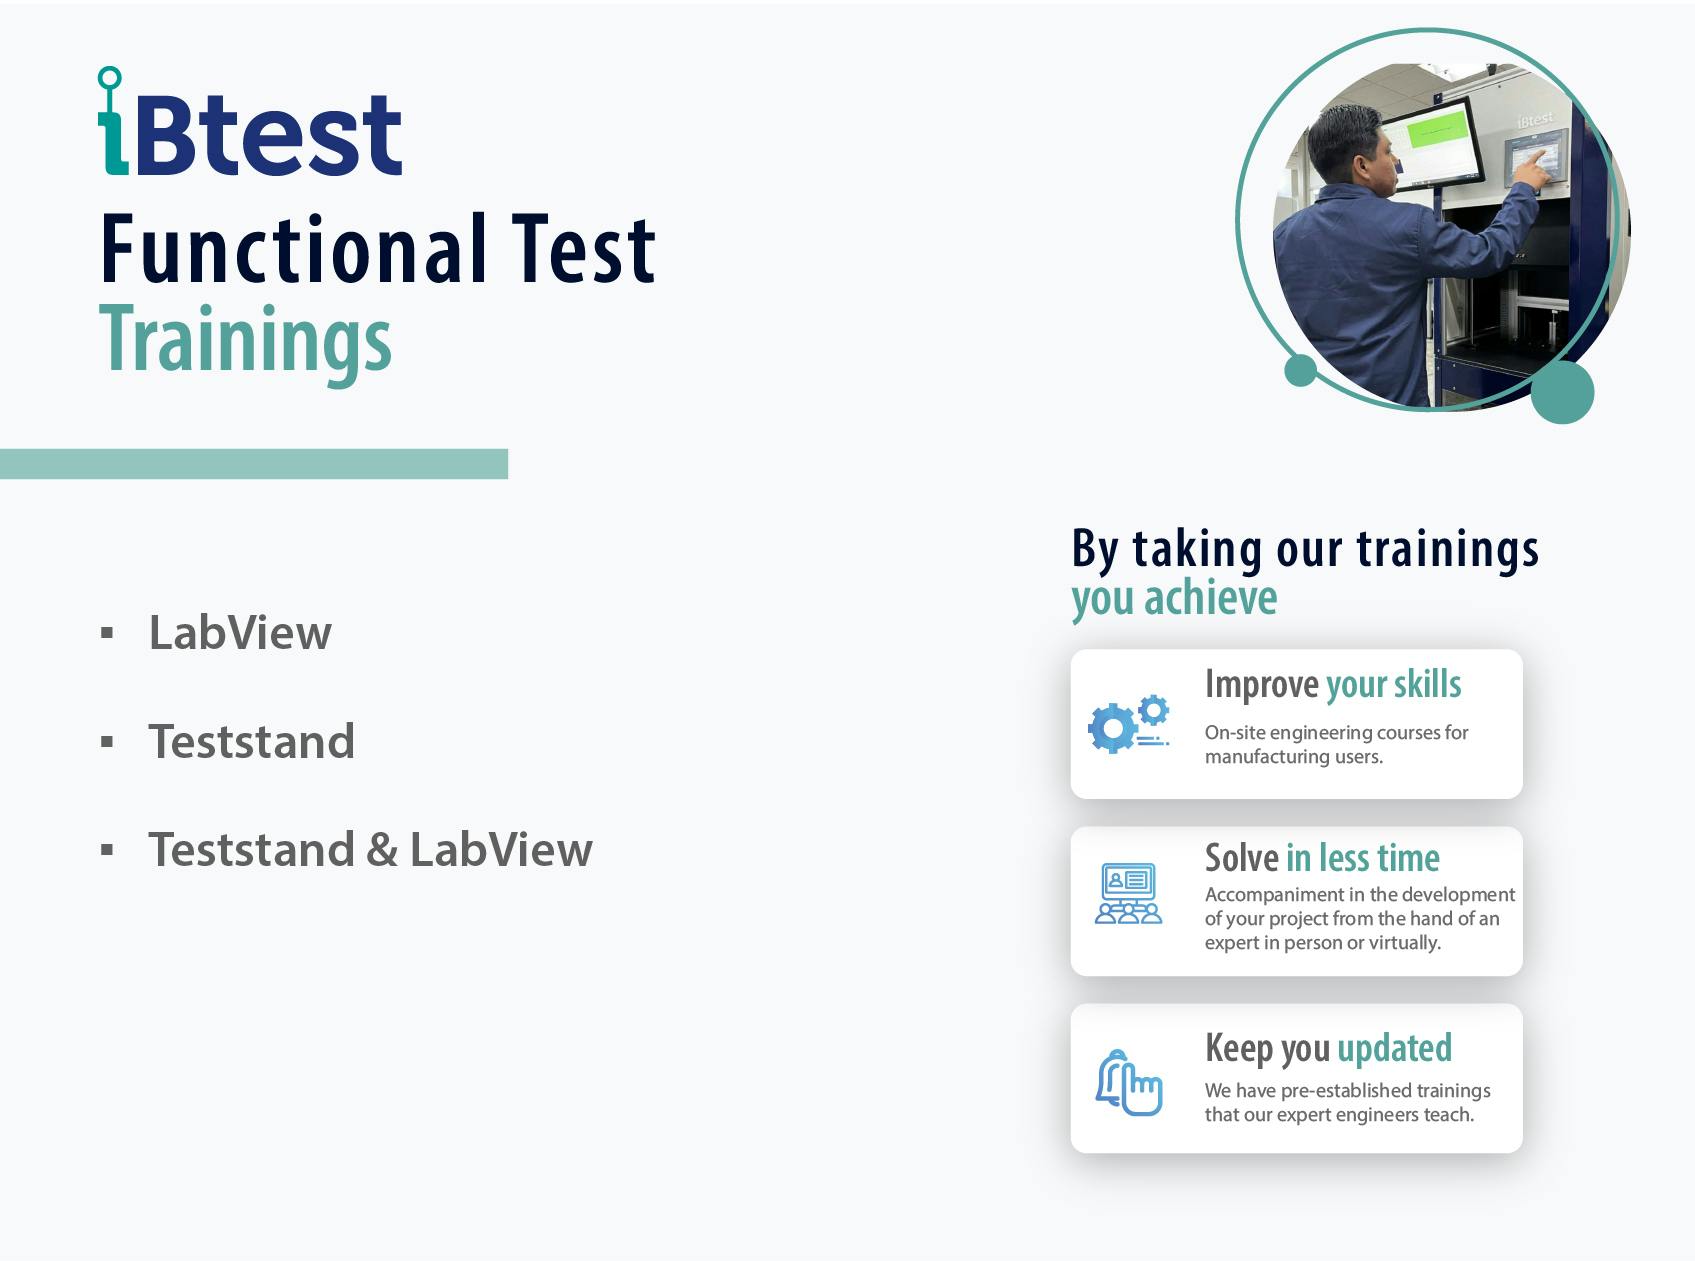 Training for face-to-face and virtual Functional Test